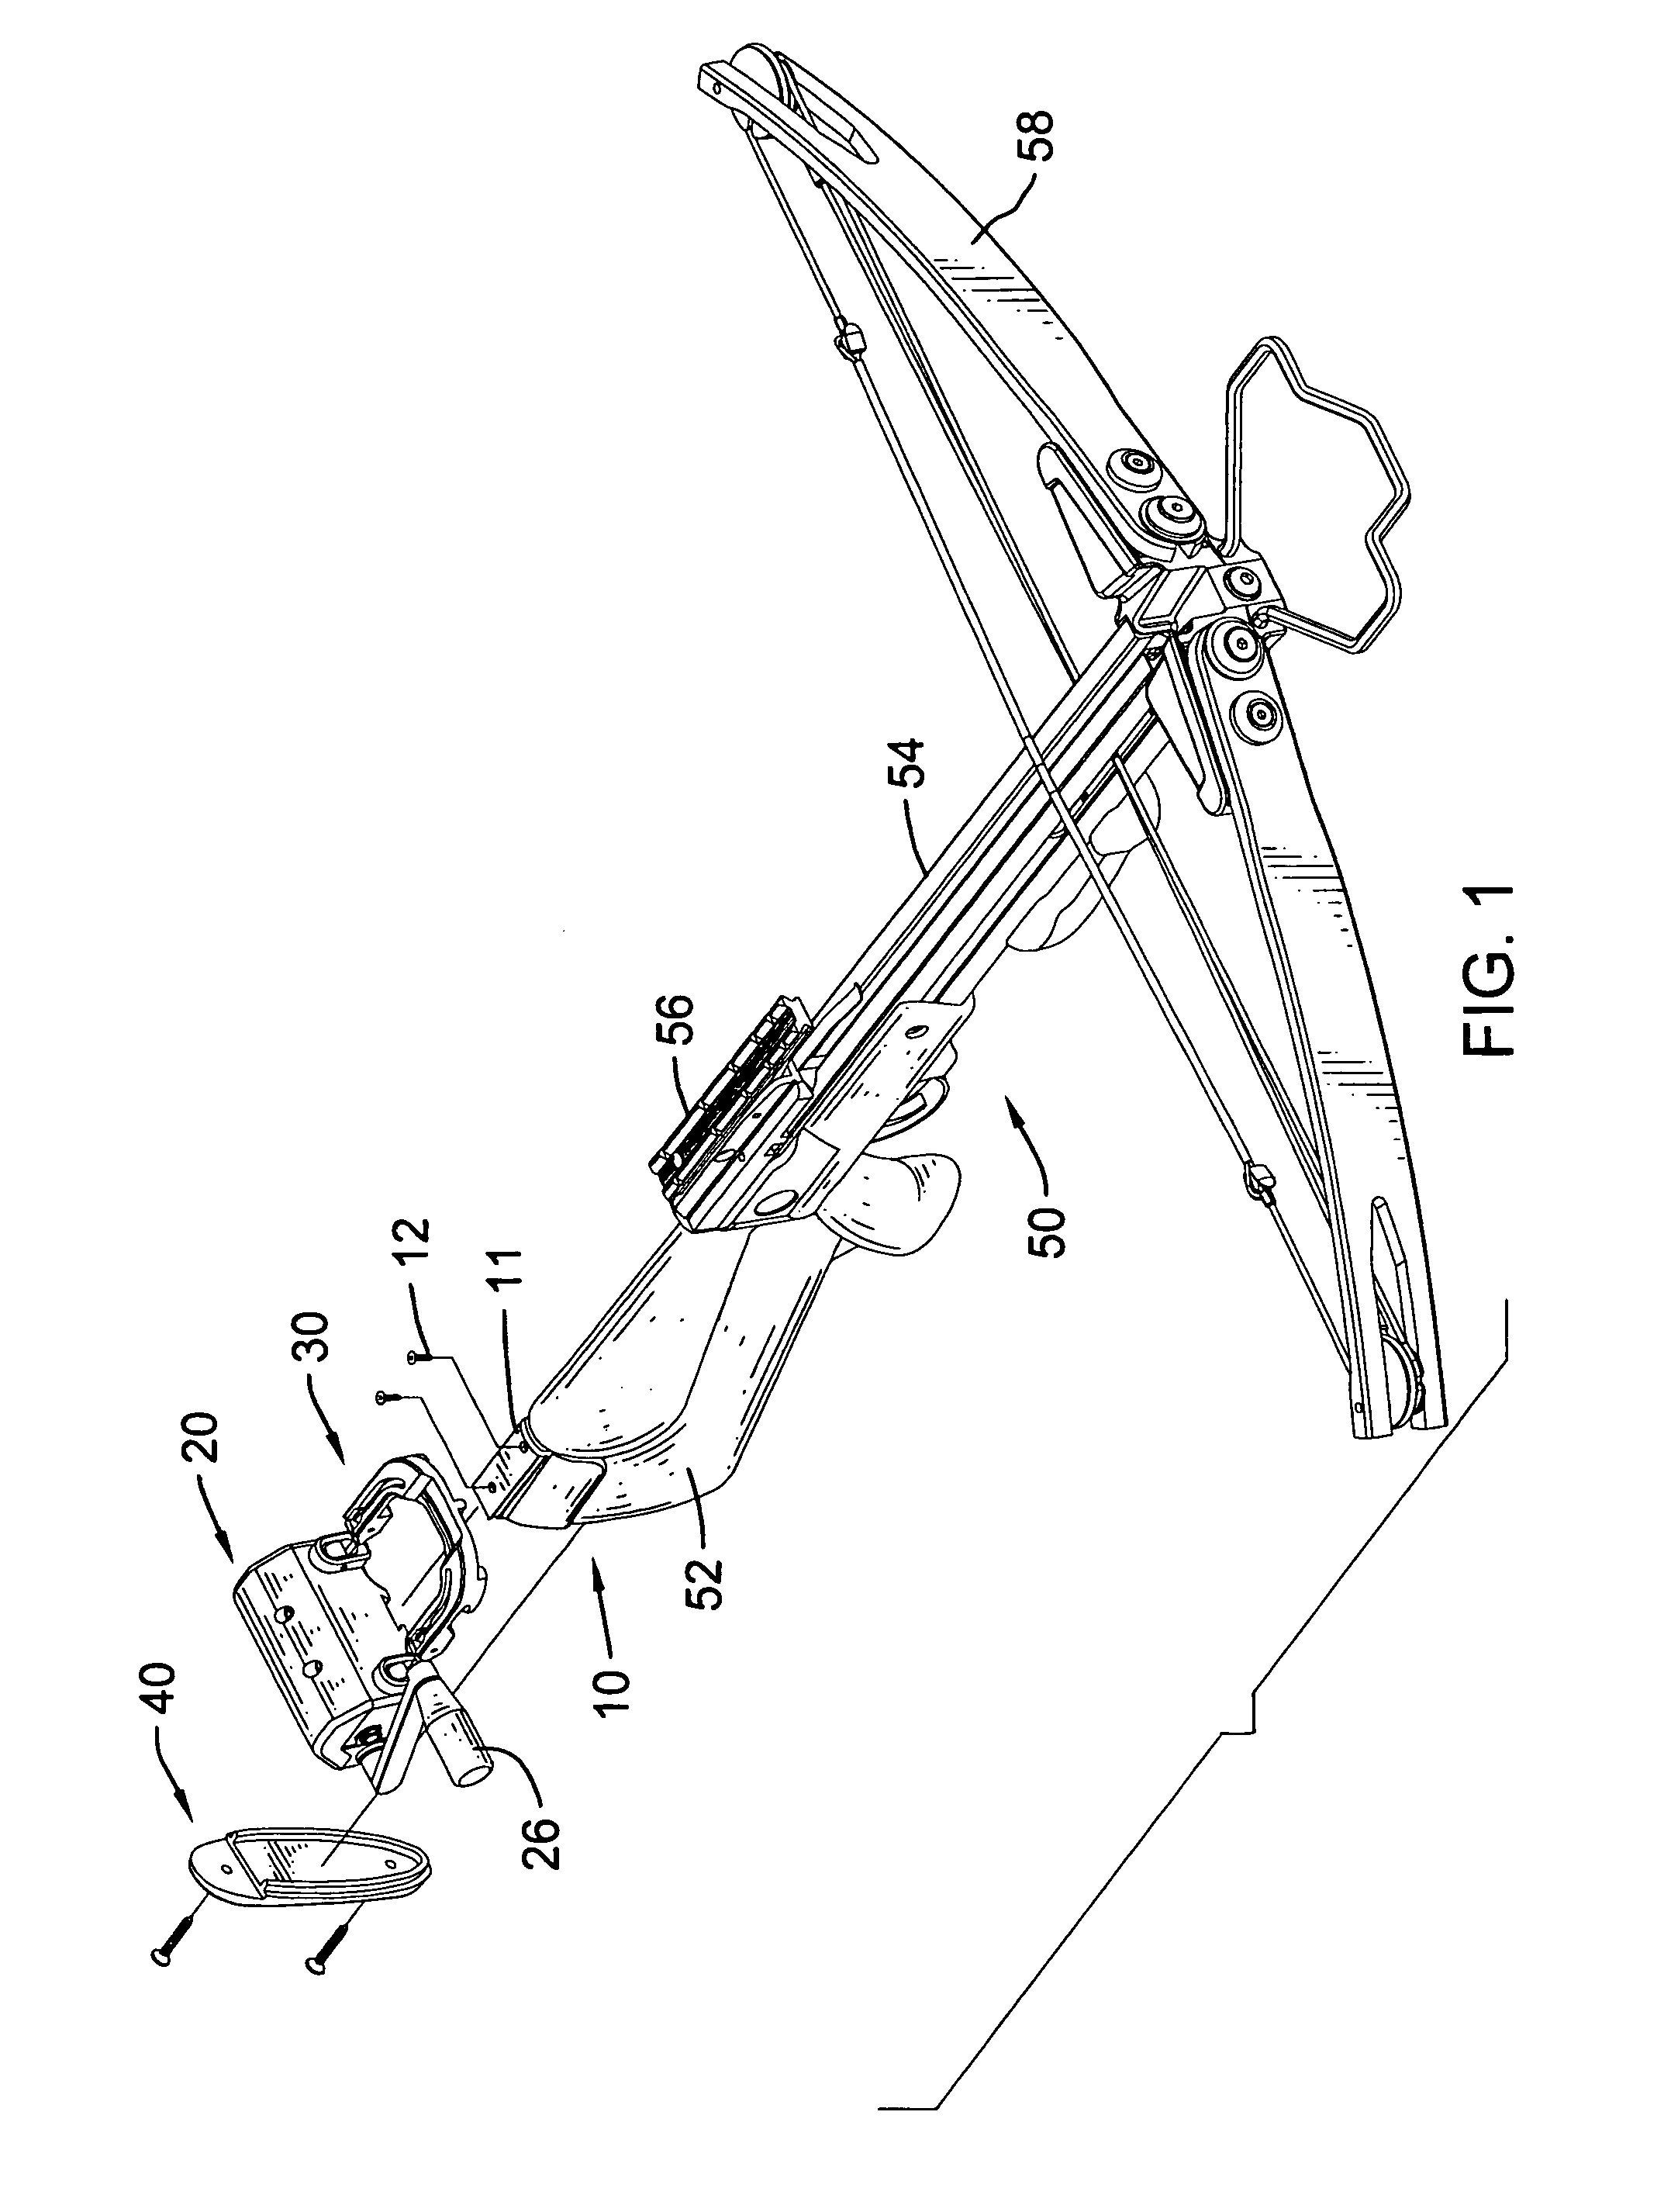 Bowstring drawing device for a crossbow